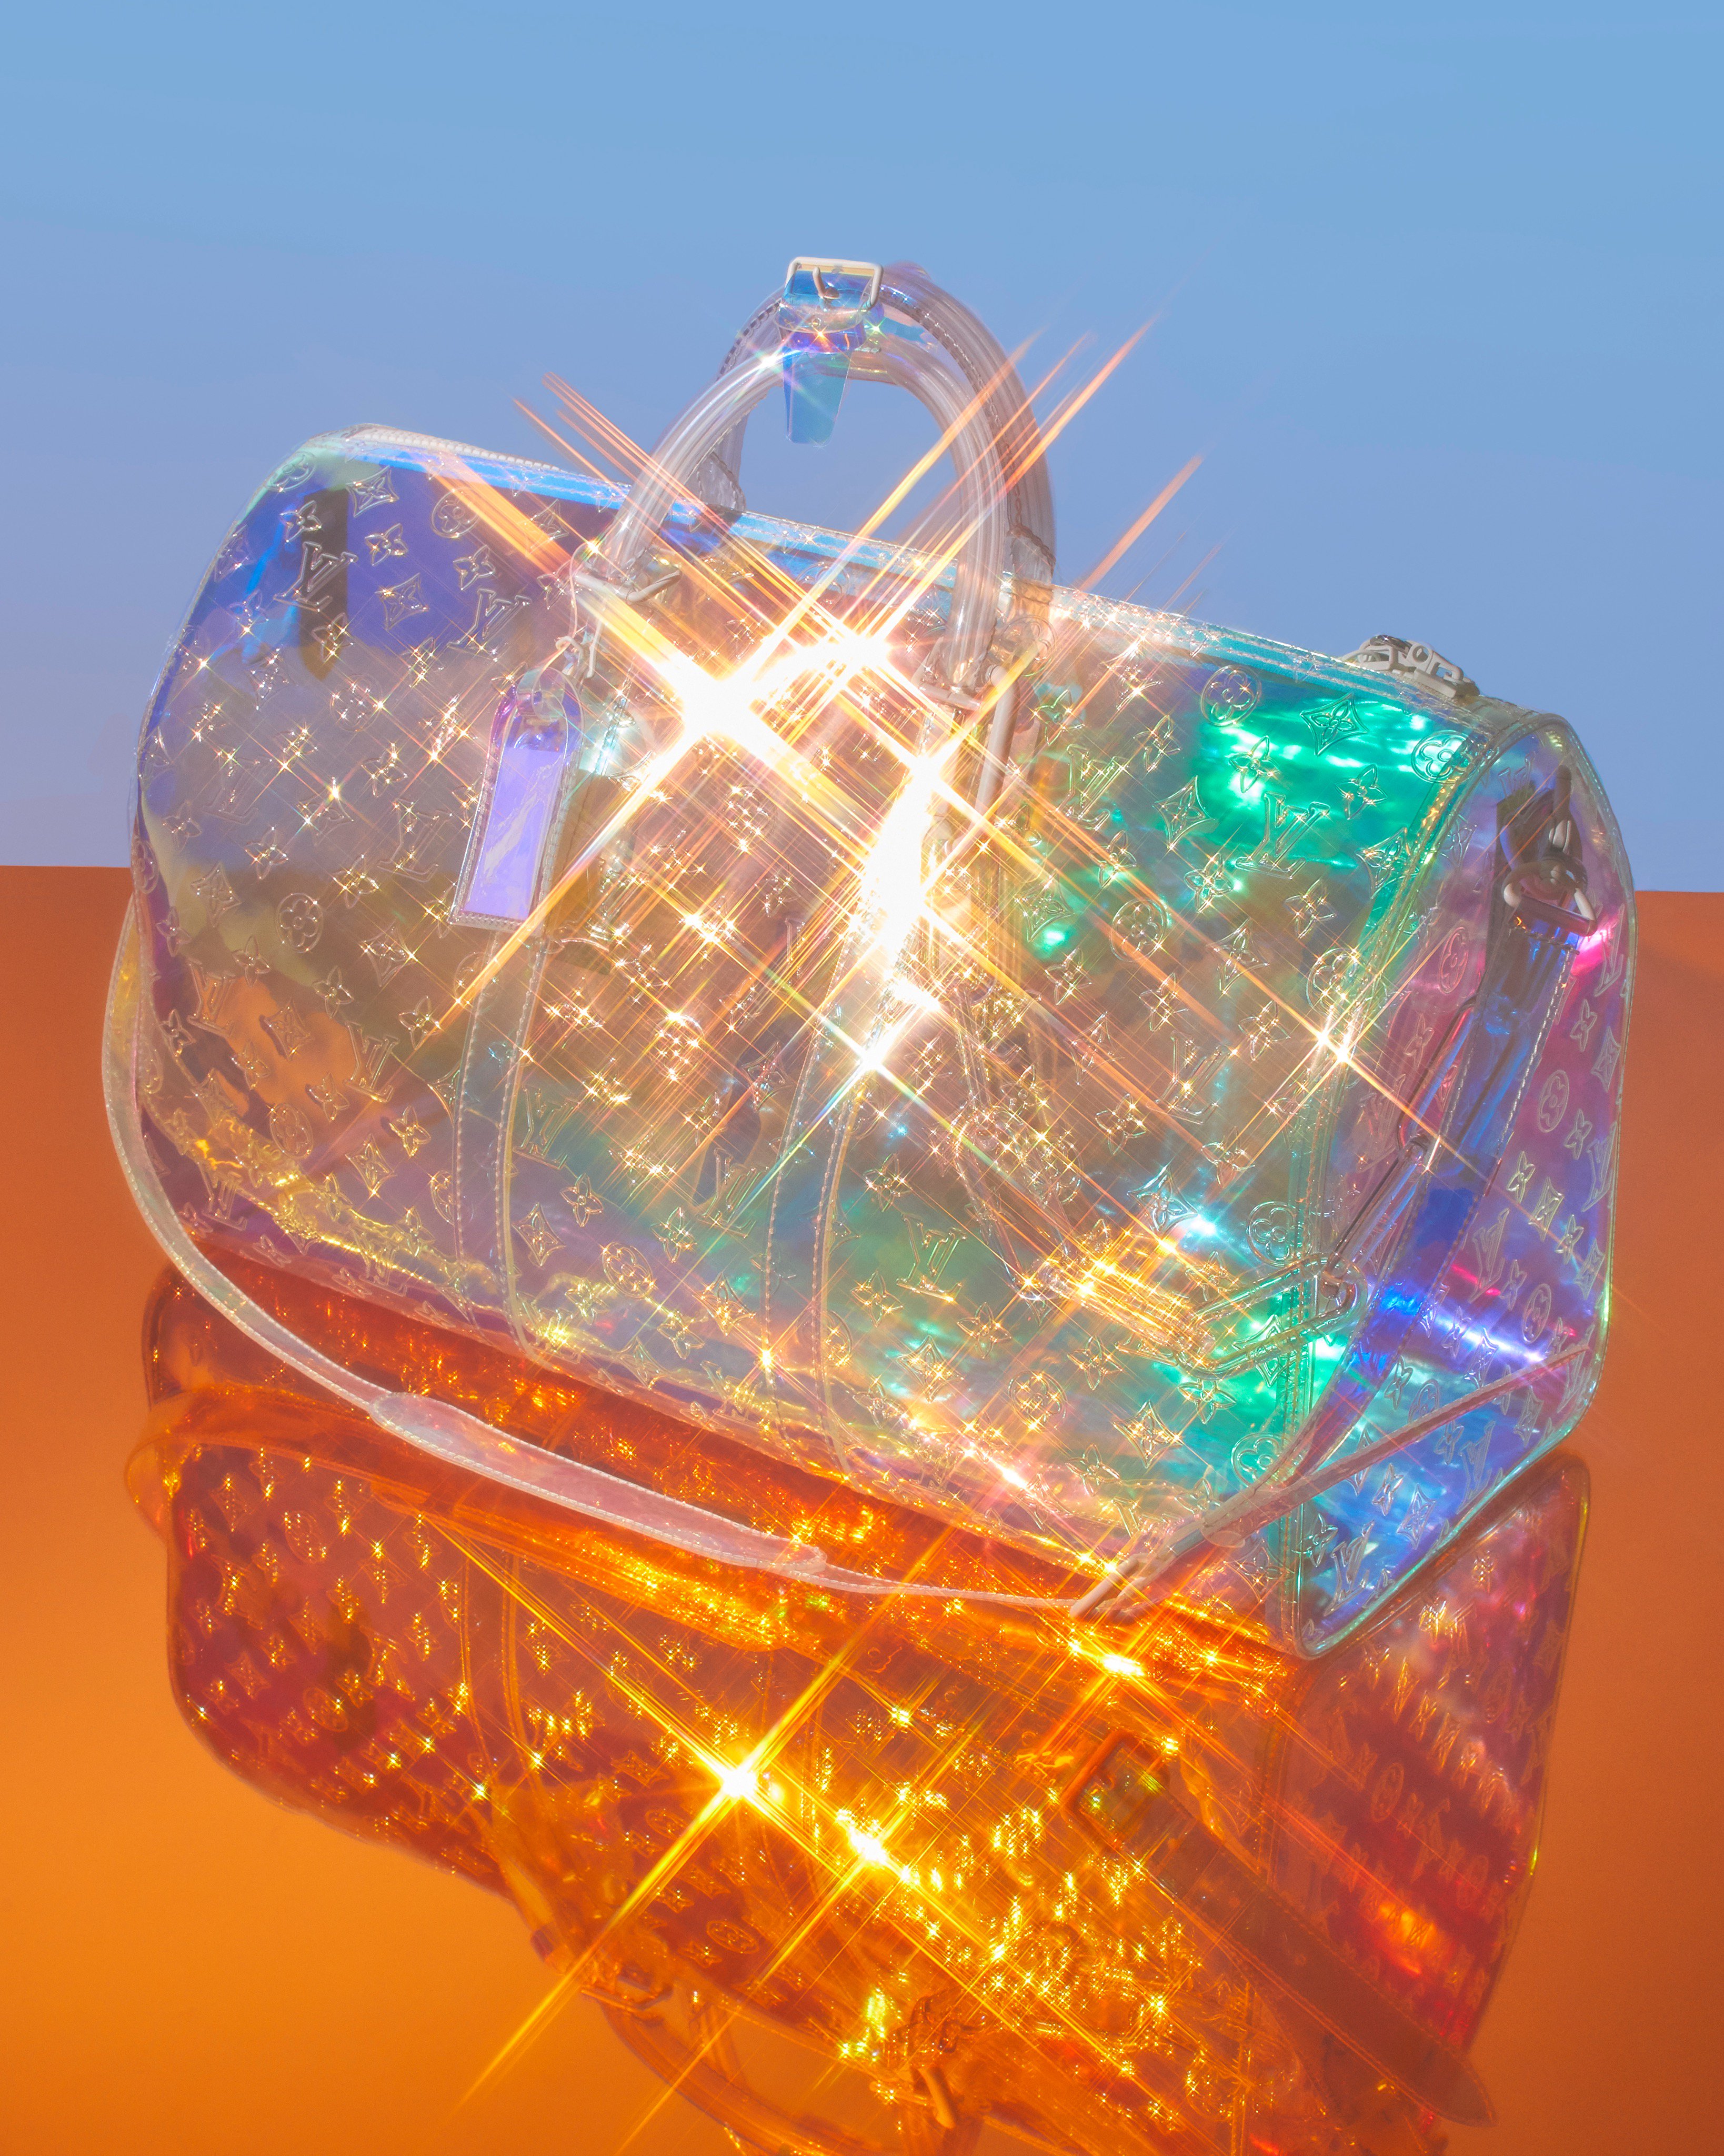 StockX on X: It's time to get your greatest glow up. Bid for a chance to  win Louis Vuitton's coveted holographic Prism Keepall from Virgil Abloh's  debut SS19 collection. Details 👉